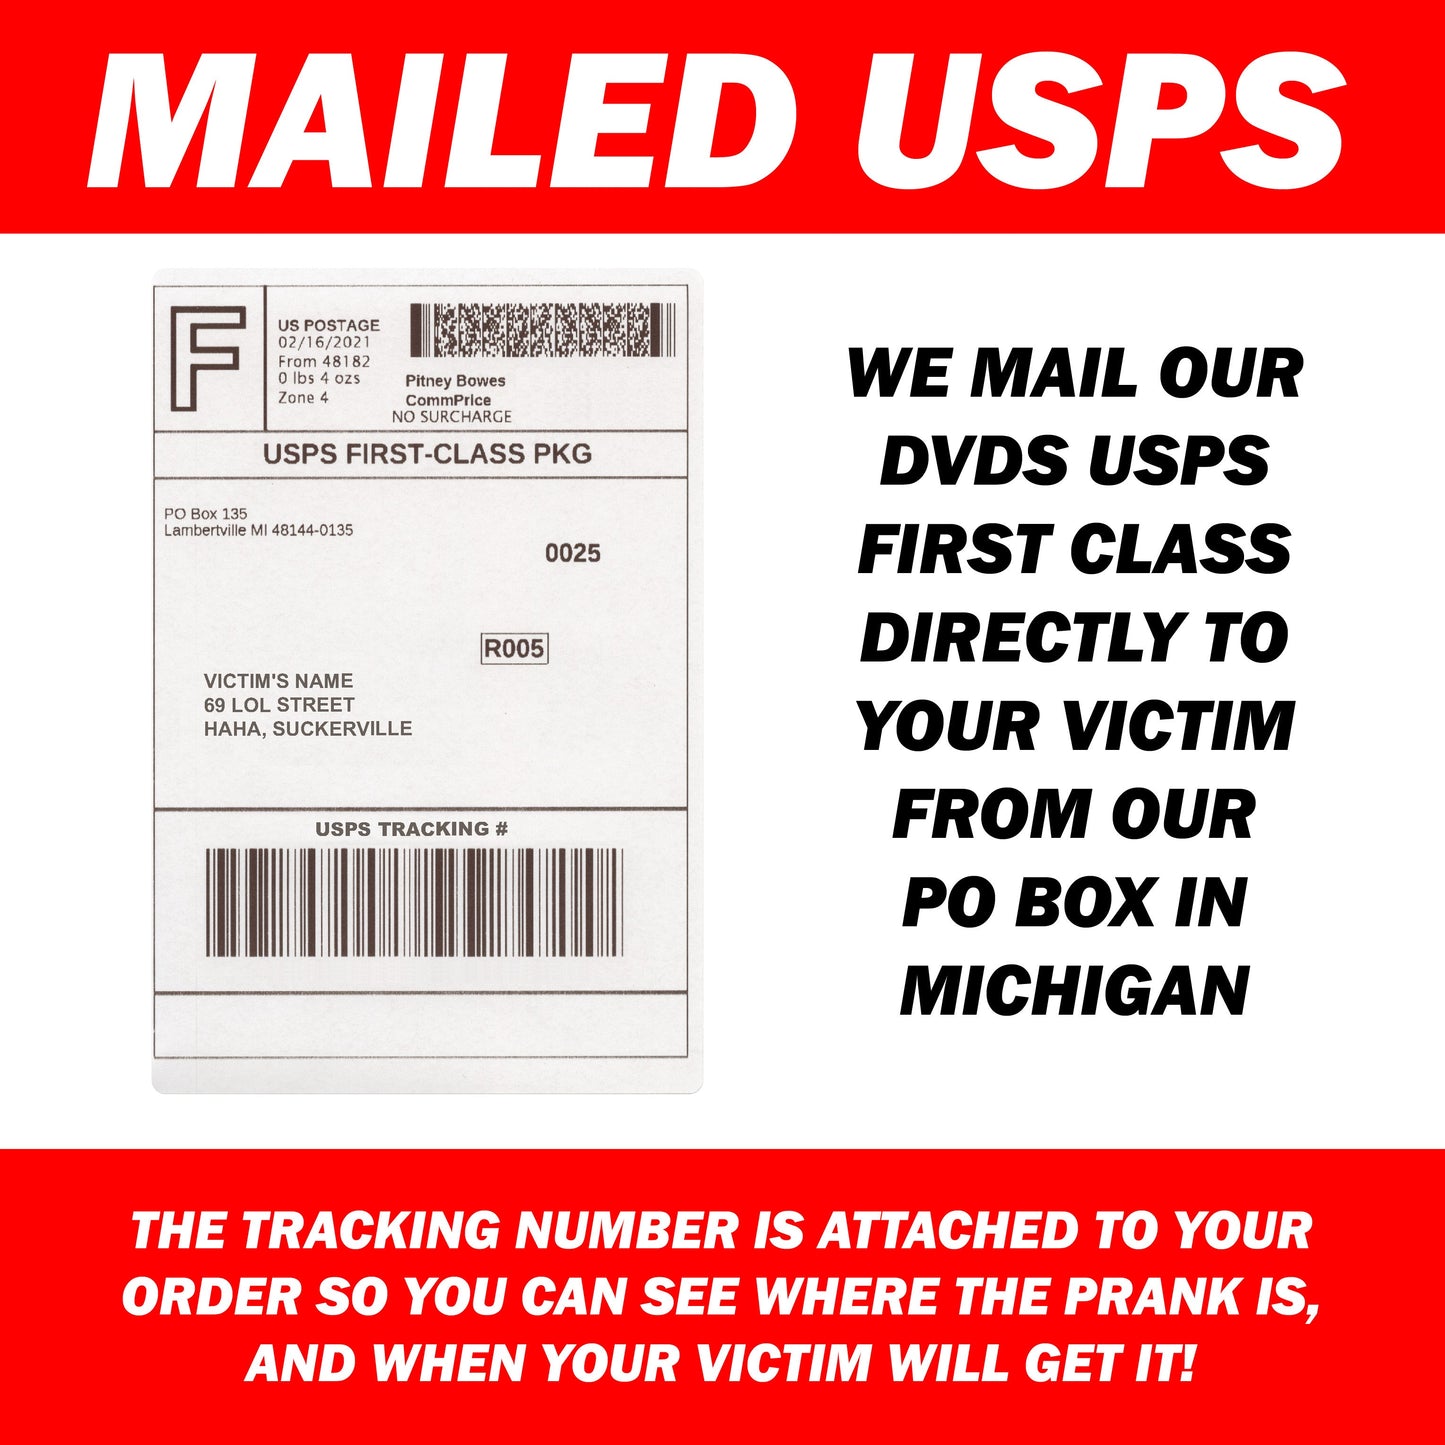 The Beginners Guide to Tossing Salad Fake DVD mail prank gets sent directly to your victims 100% anonymously!